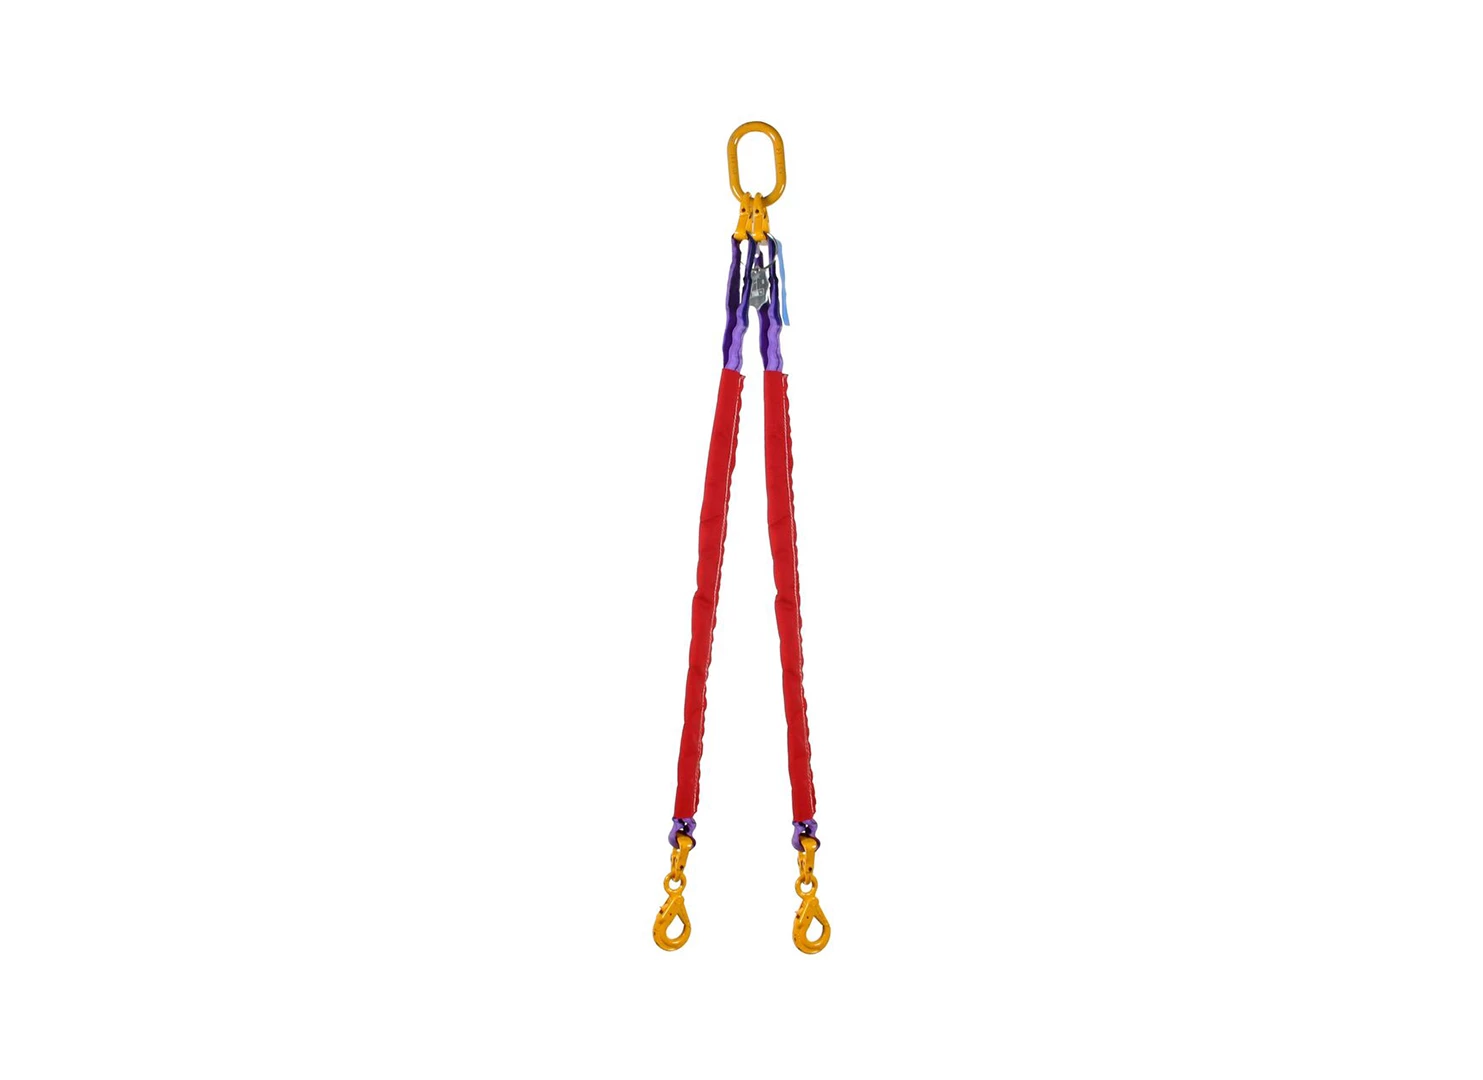 Product: Round slings 2 7t*4m